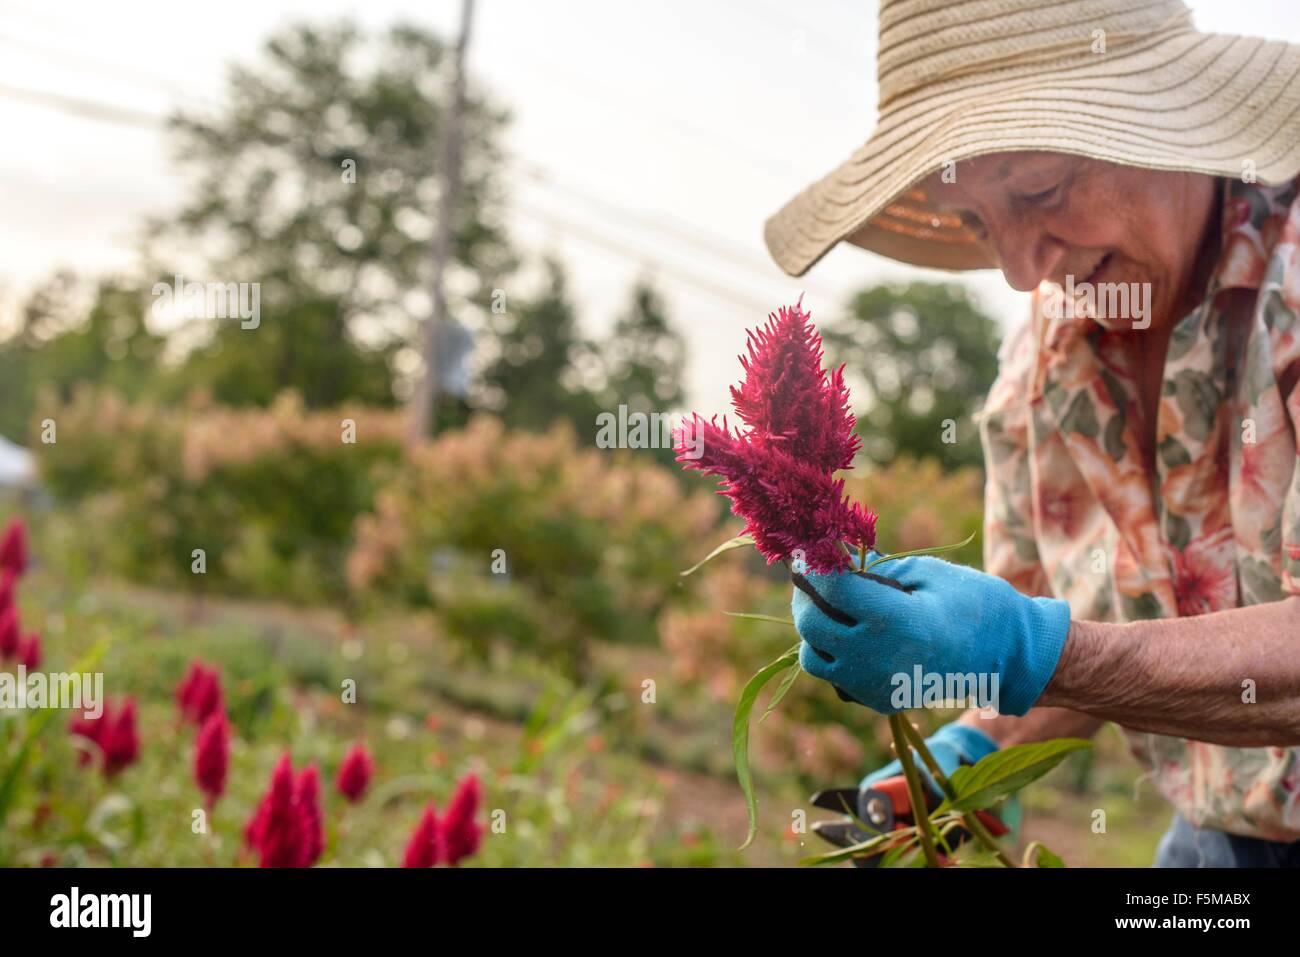 Senior woman harvesting and trimming flowers on farm Stock Photo